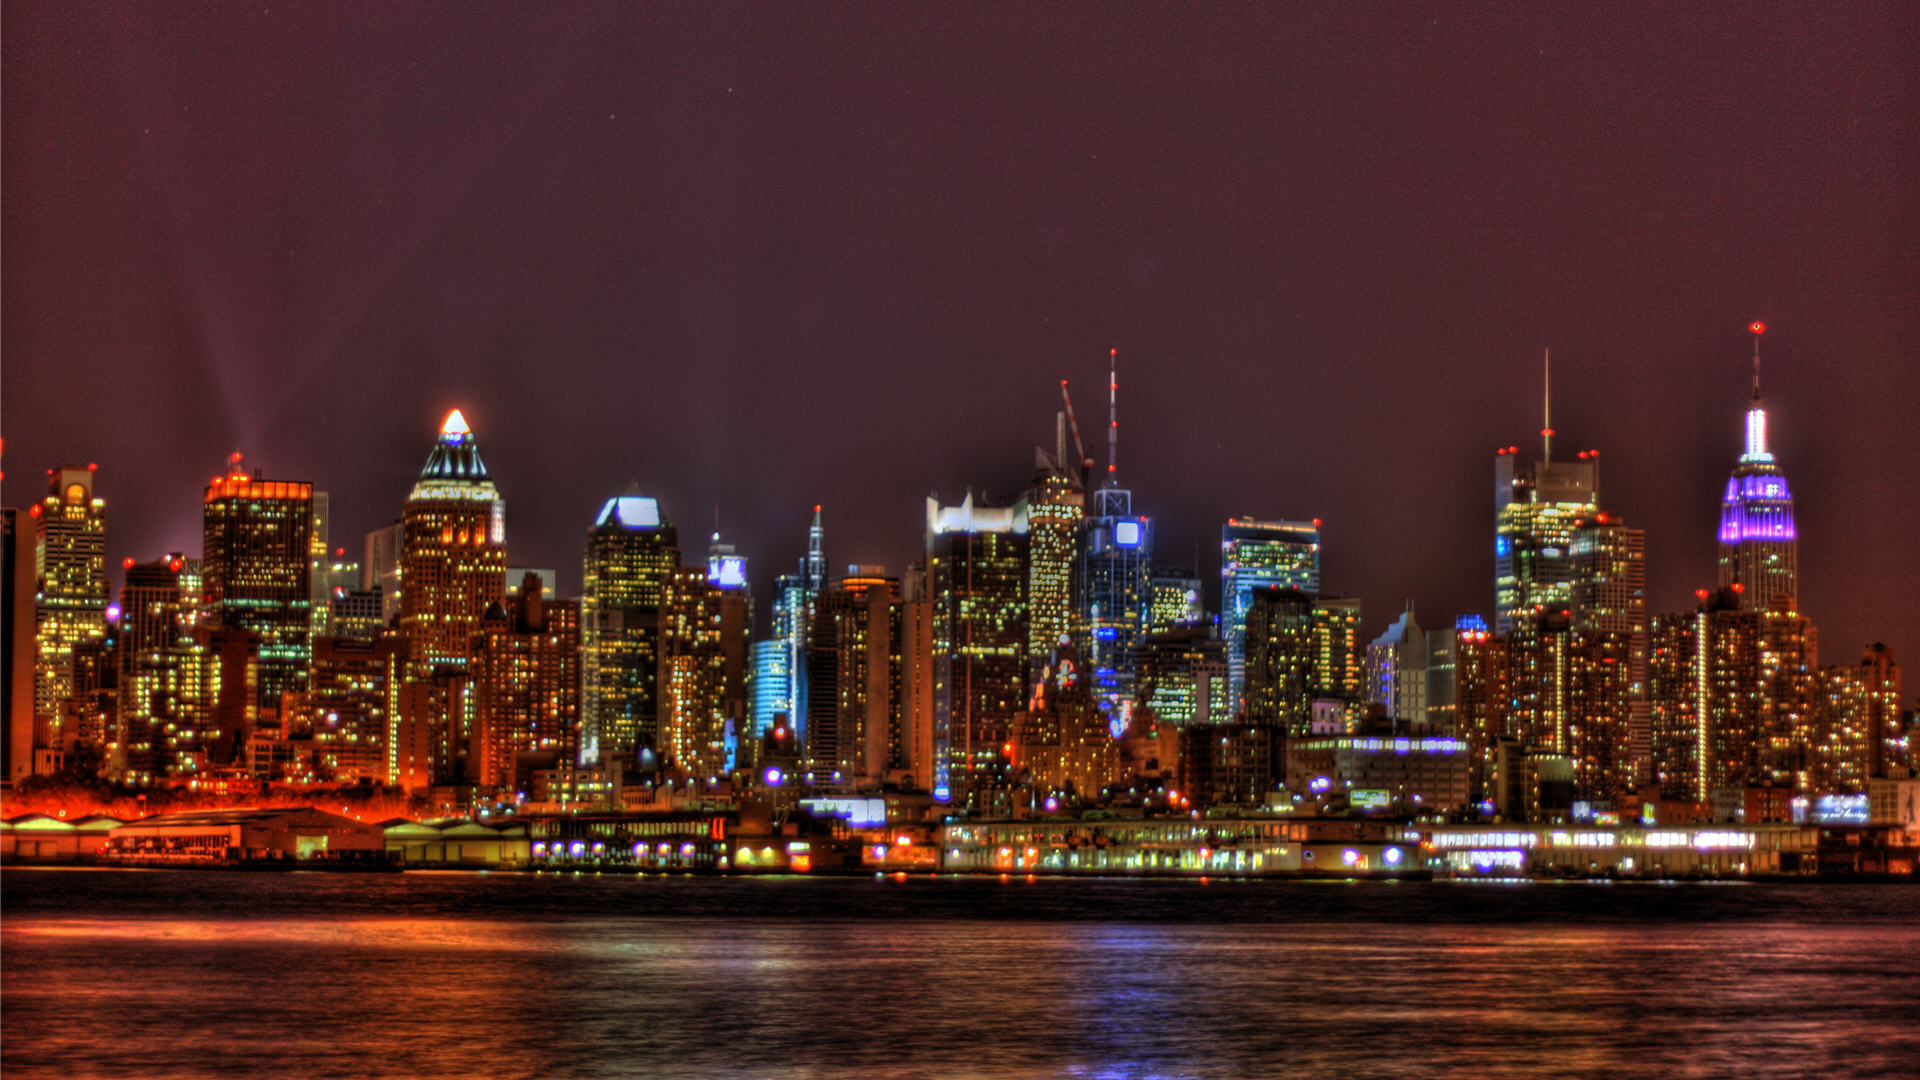 Skyline Pictures Of New York City With Resolutions